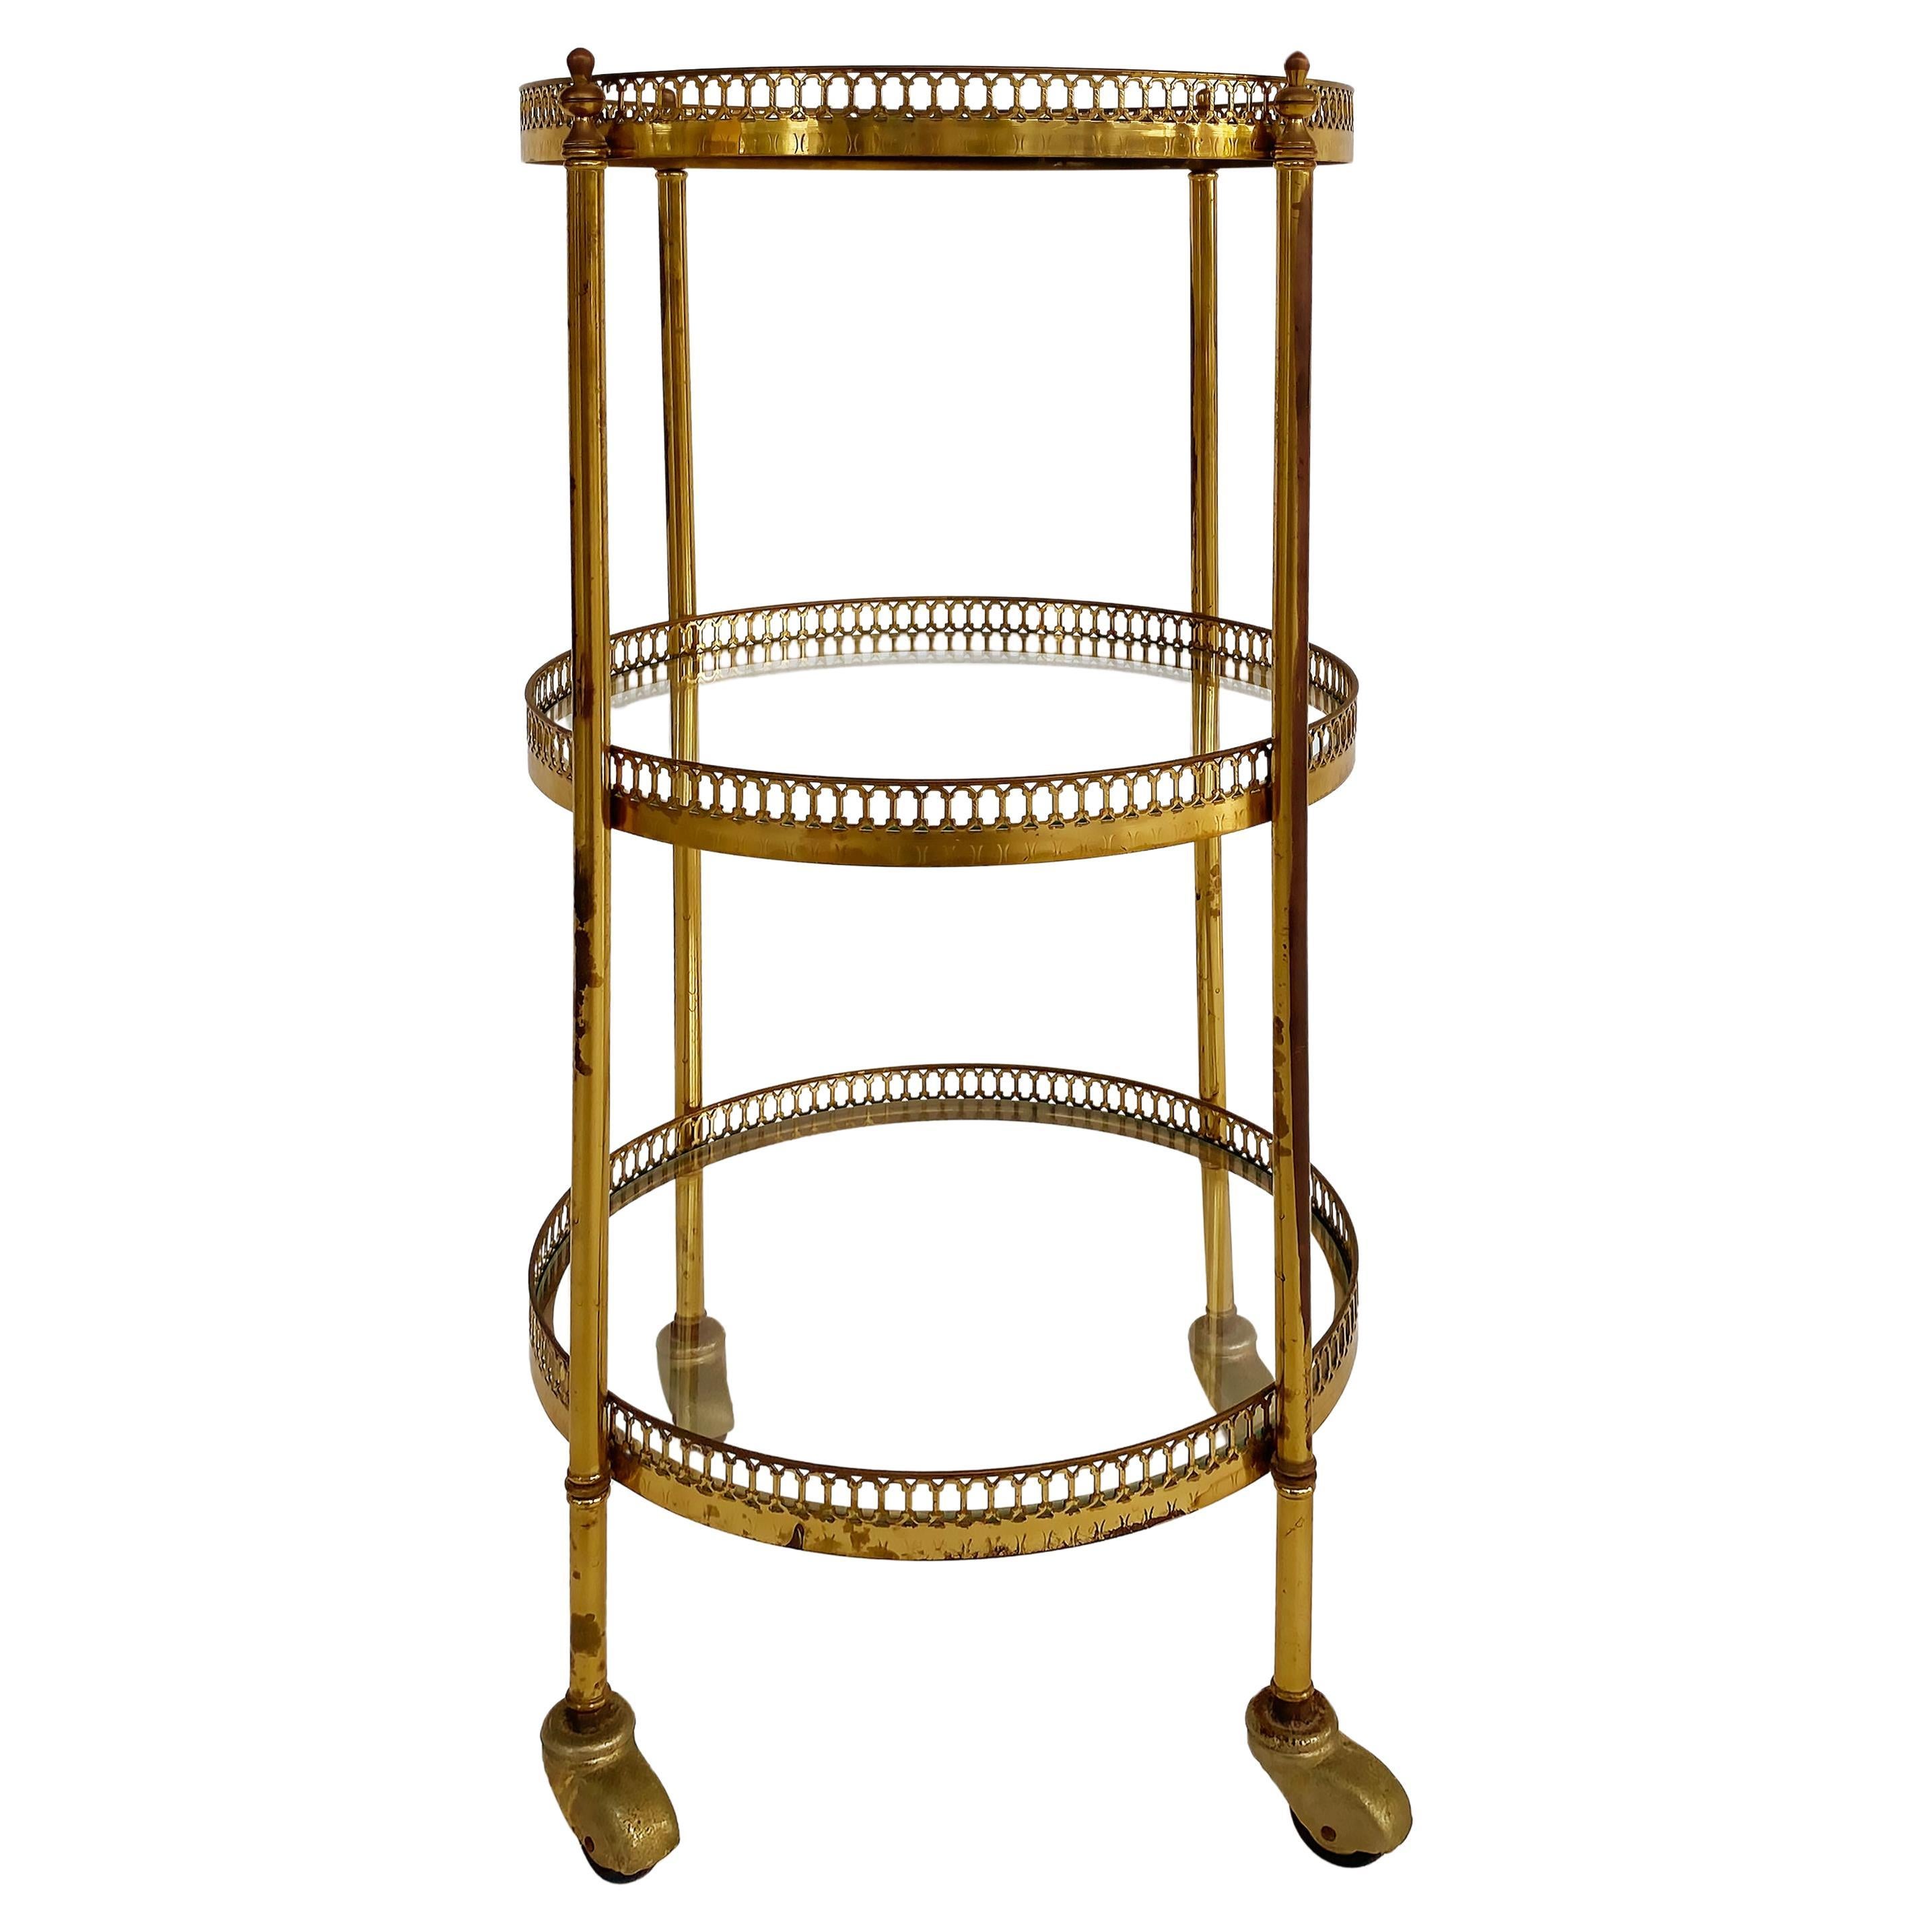 French Mid-century Modern 3-Tiered Brass and Glass Table on Casters